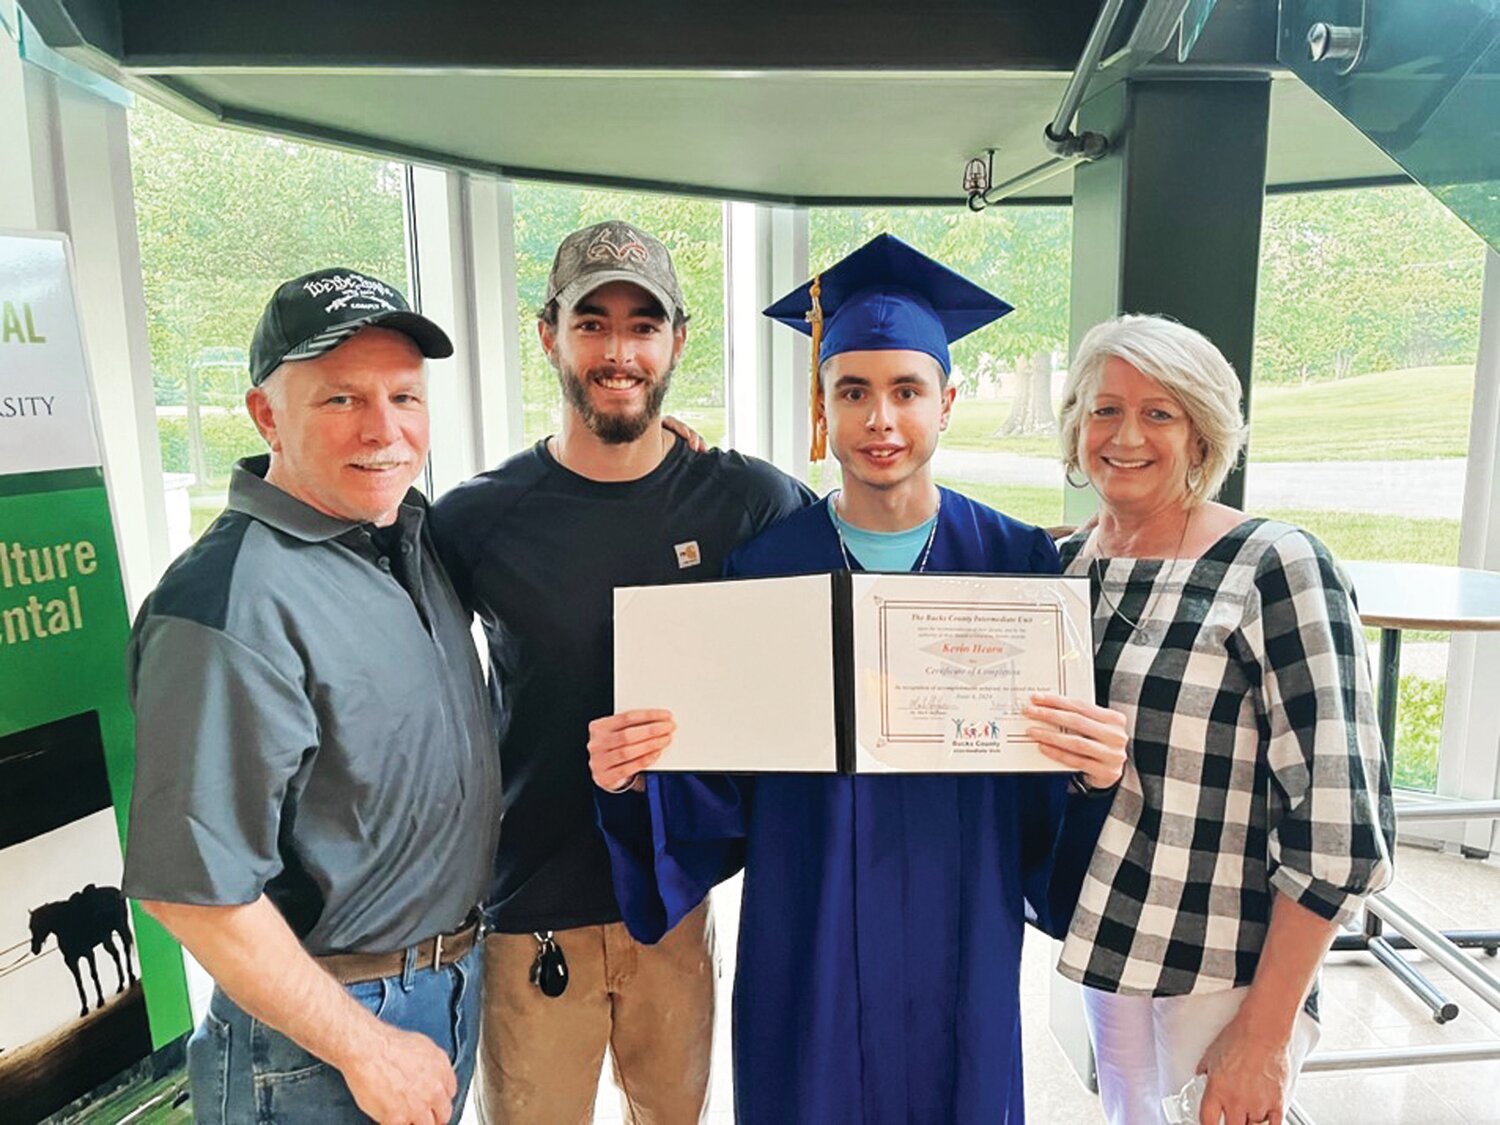 Kevin Hearn, surrounded by his parents and brother, holds up his graduation certificate.